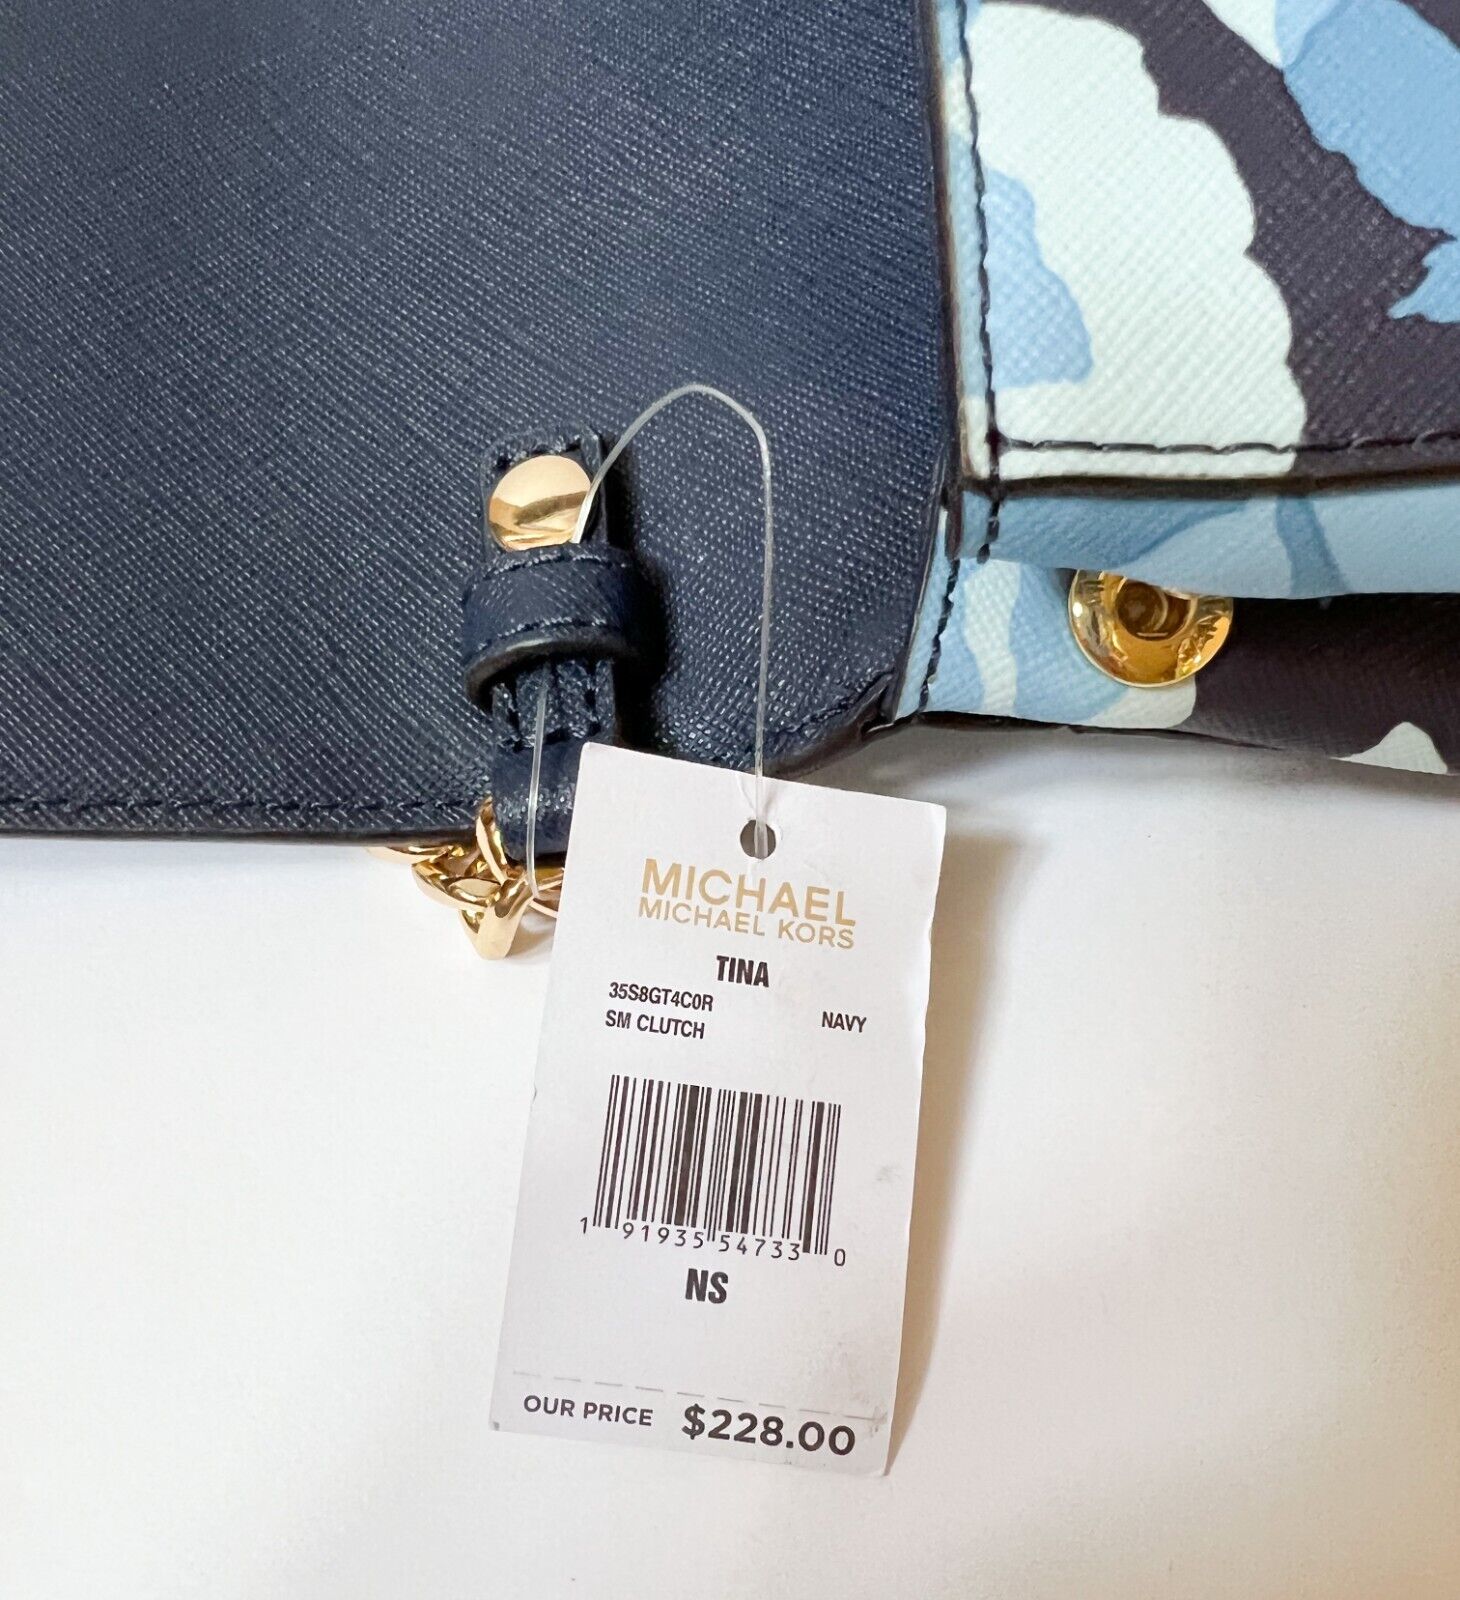 Michael Kors Tina Small Clutch Navy Blue Floral Saffiano Leather 